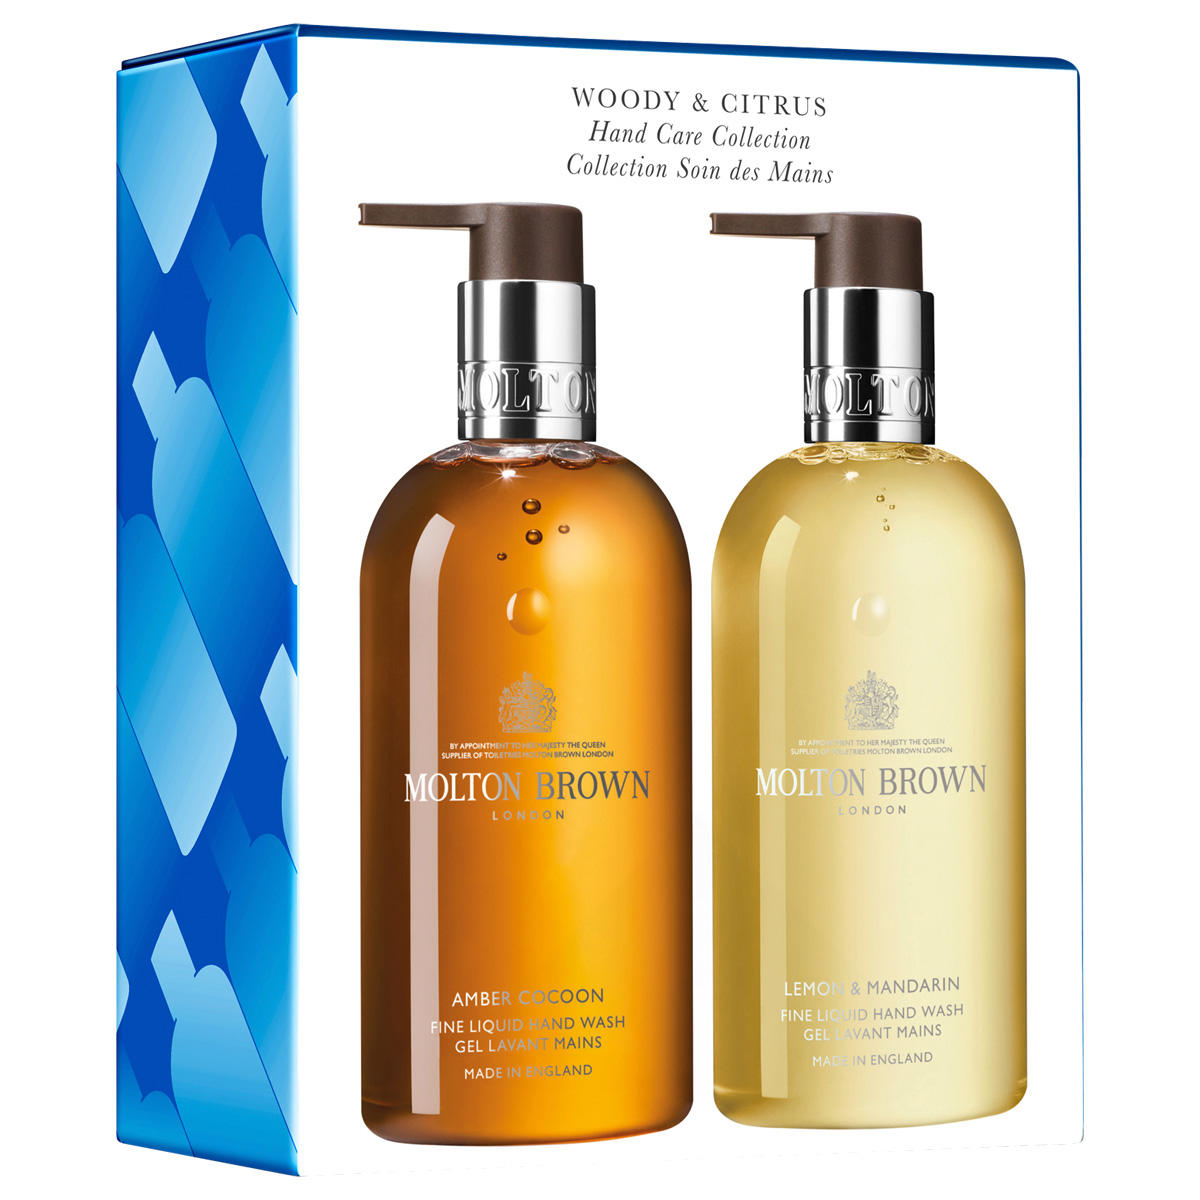 MOLTON BROWN Woody & Citrus Hand Care Collection 2 x 300 ml - 1